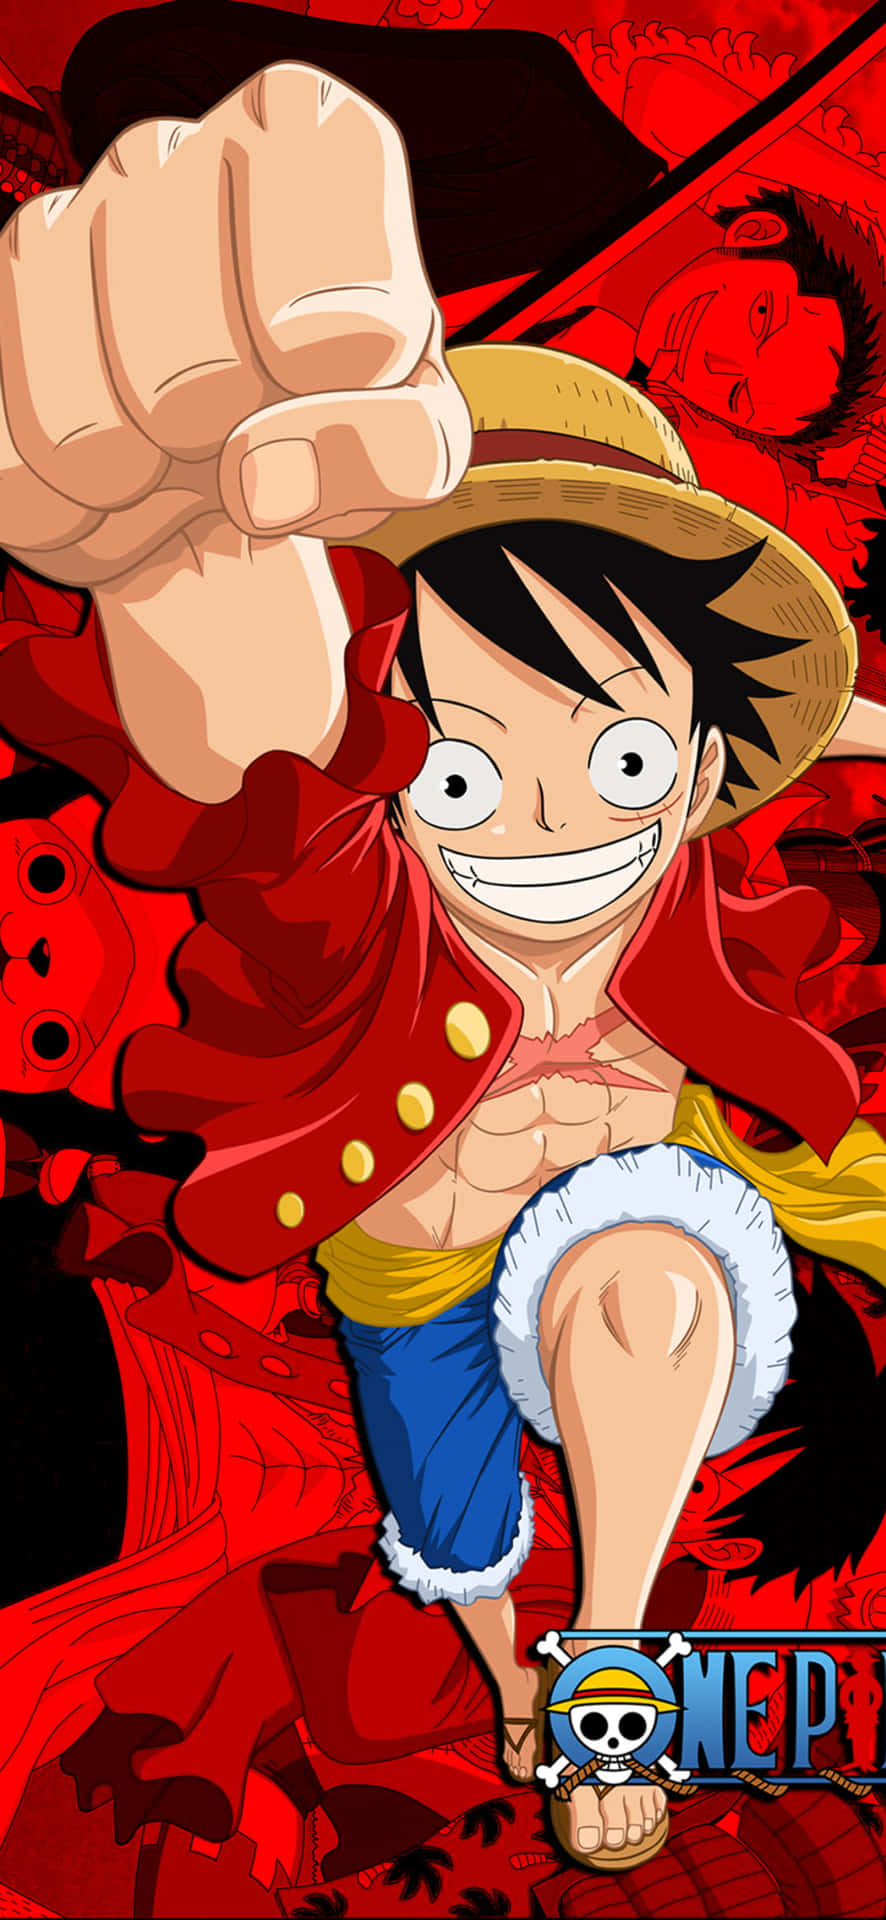 Free One Piece Luffy Iphone Wallpaper Downloads, [100+] One Piece Luffy  Iphone Wallpapers for FREE 